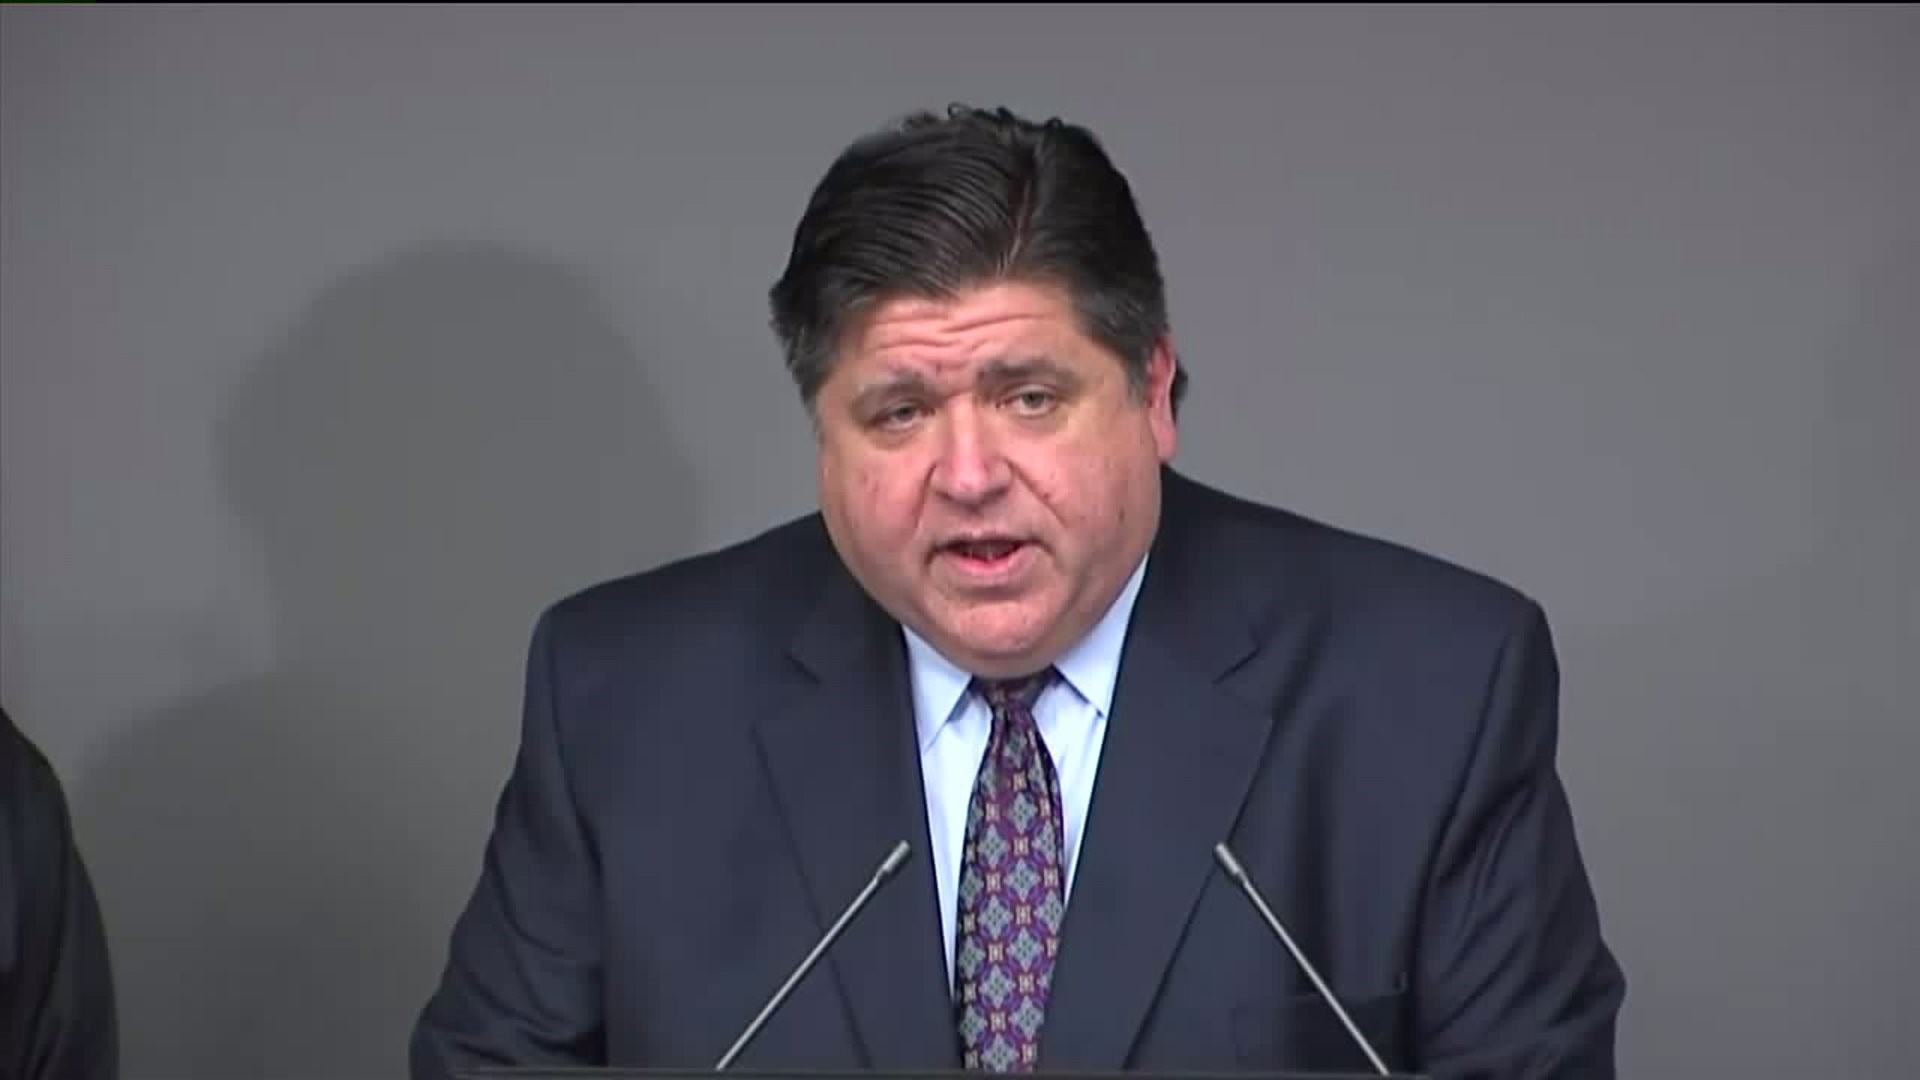 Illinois Governor Pritzker addresses the state during extreme cold